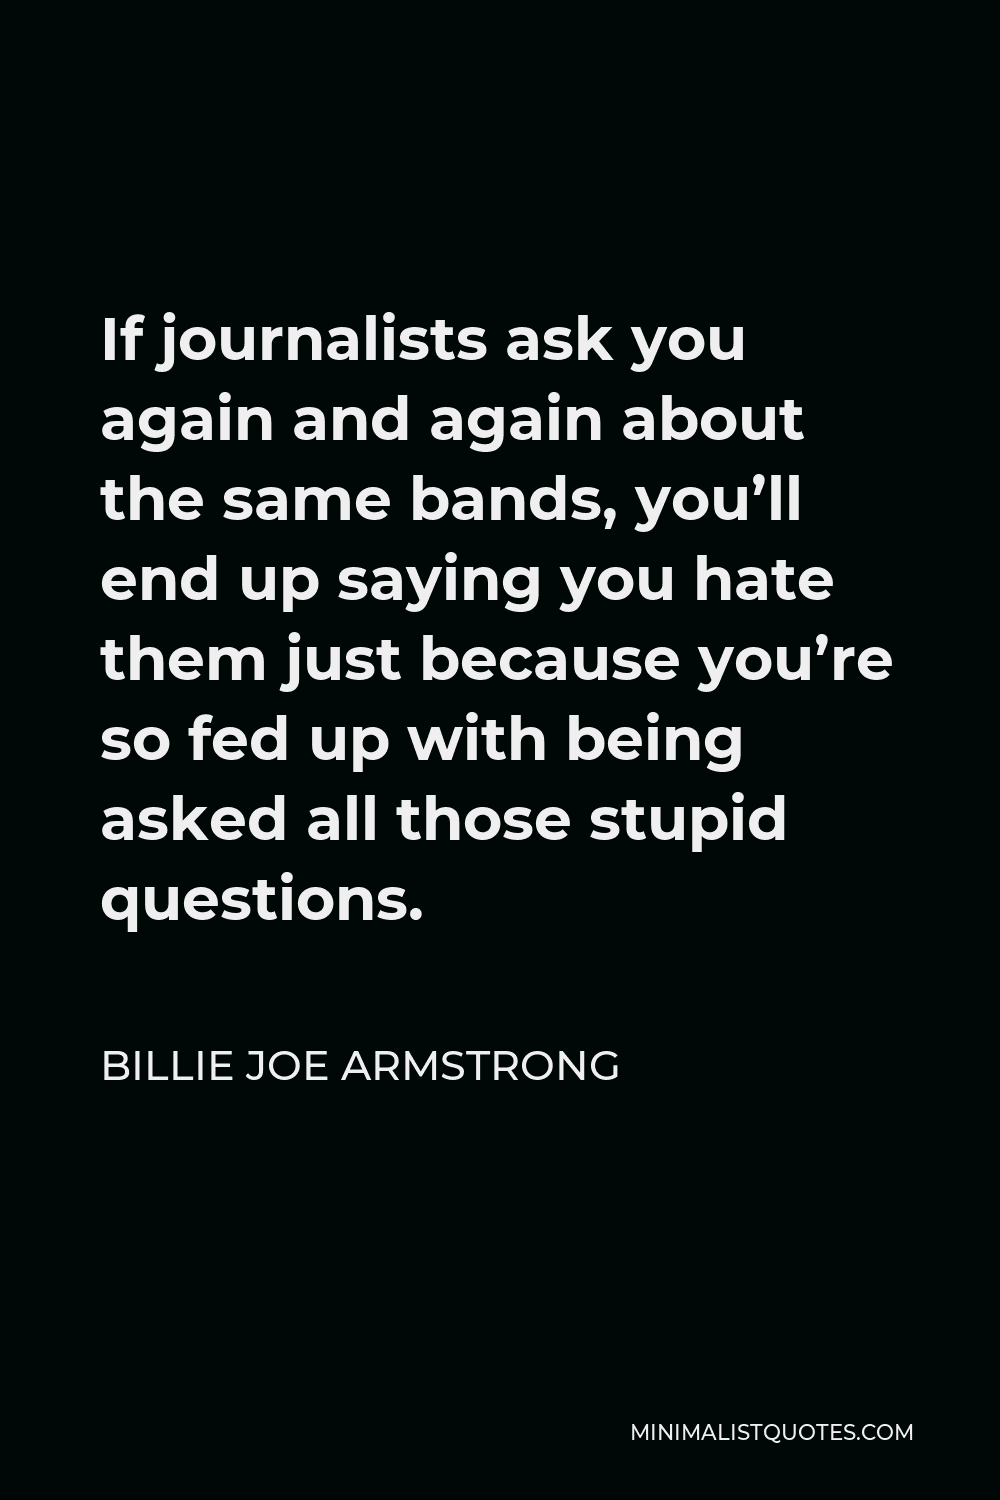 Billie Joe Armstrong Quote - If journalists ask you again and again about the same bands, you’ll end up saying you hate them just because you’re so fed up with being asked all those stupid questions.